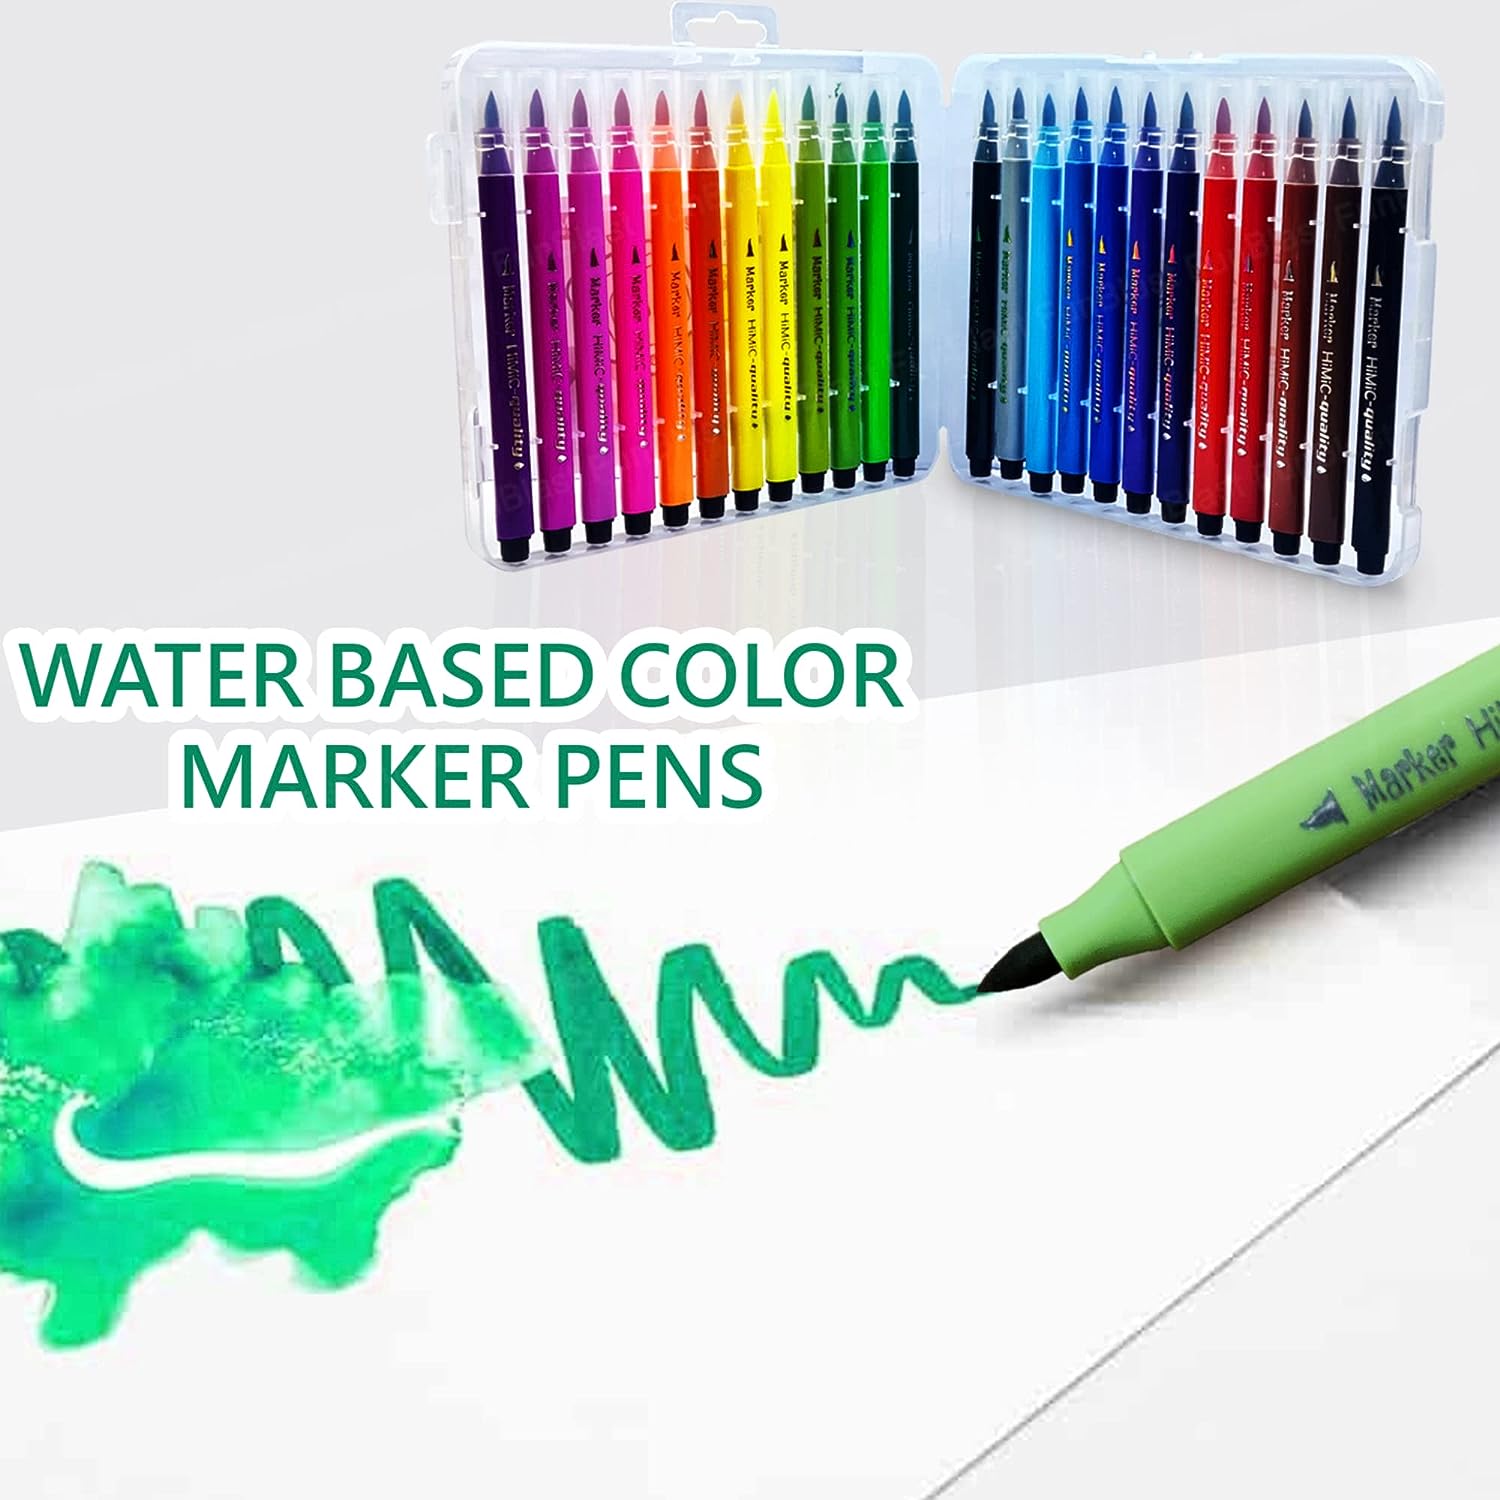 Brush-Sketch Markers Pens For Artists-Coloring Kit Art Markers,Fineliner  Colour Pens,Water Based Marker For Calligraphy Drawing Sketching Coloring